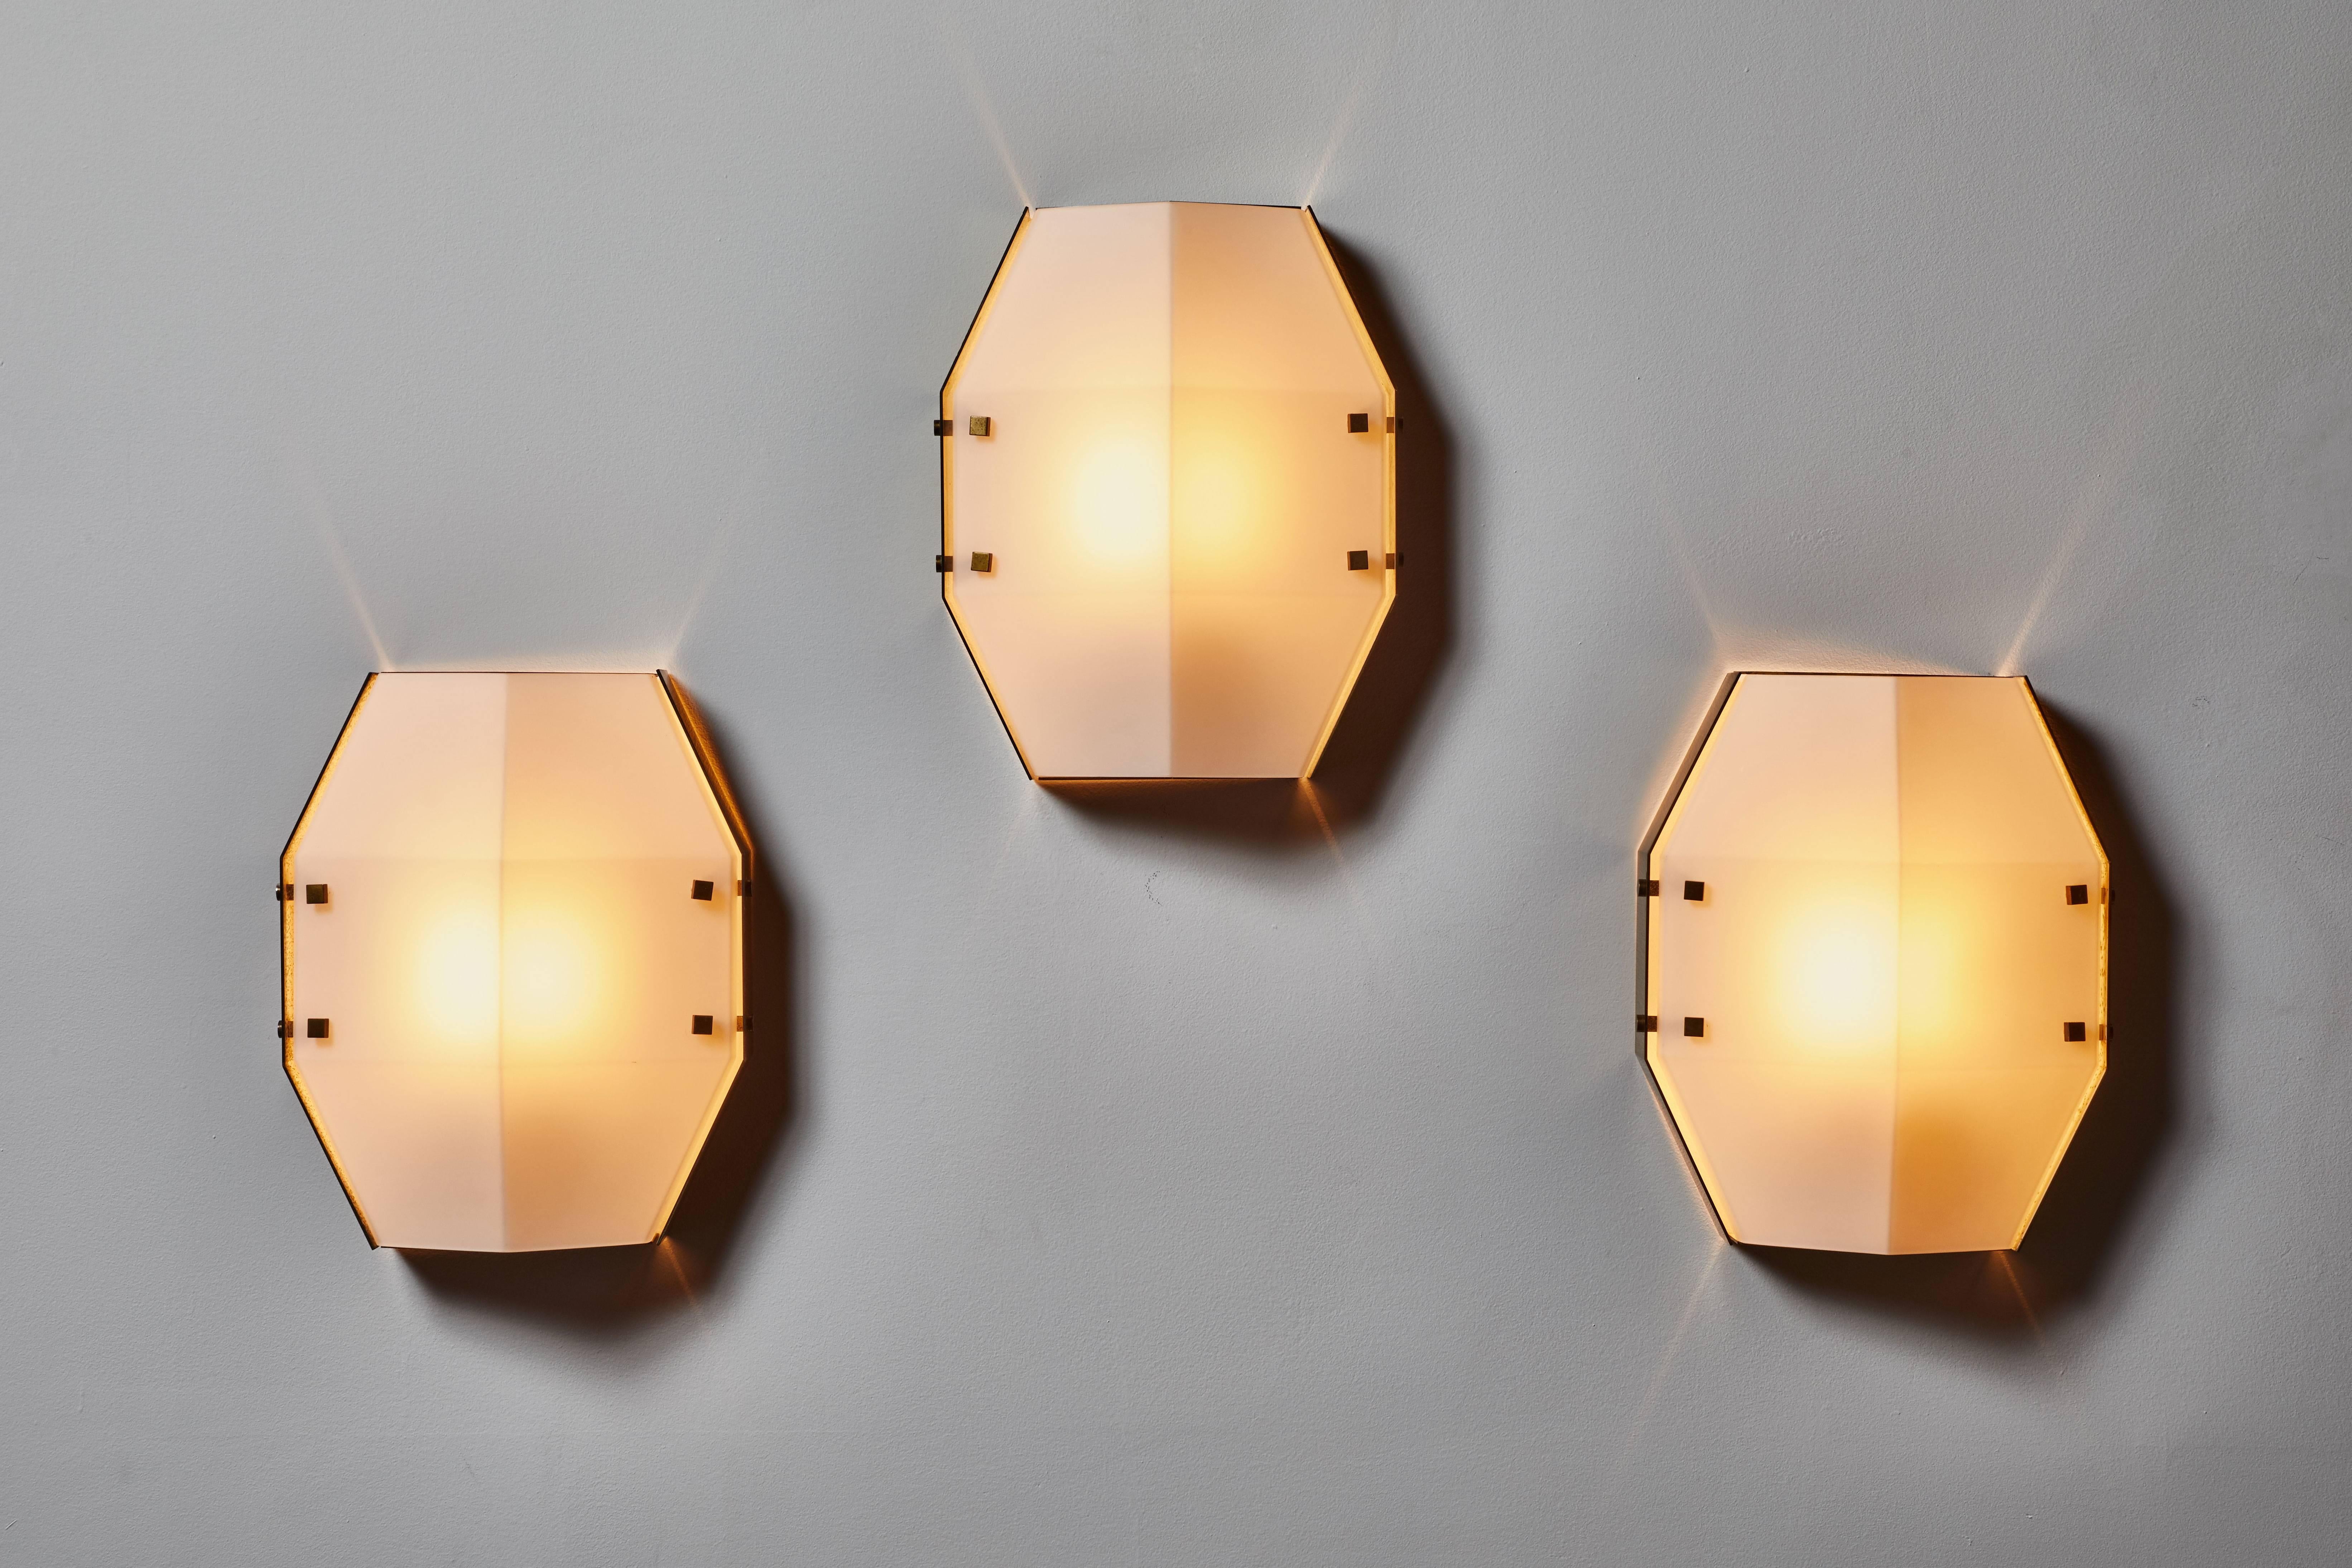 Three rare flush mount wall/ceiling lights by Angelo Lelli for Arredoluce. Designed and manufactured in Italy, circa 1960s. Brushed satin glass, brass hardware and enameled metal frame. Rewired for US junction boxes. Each light takes one E27 100w